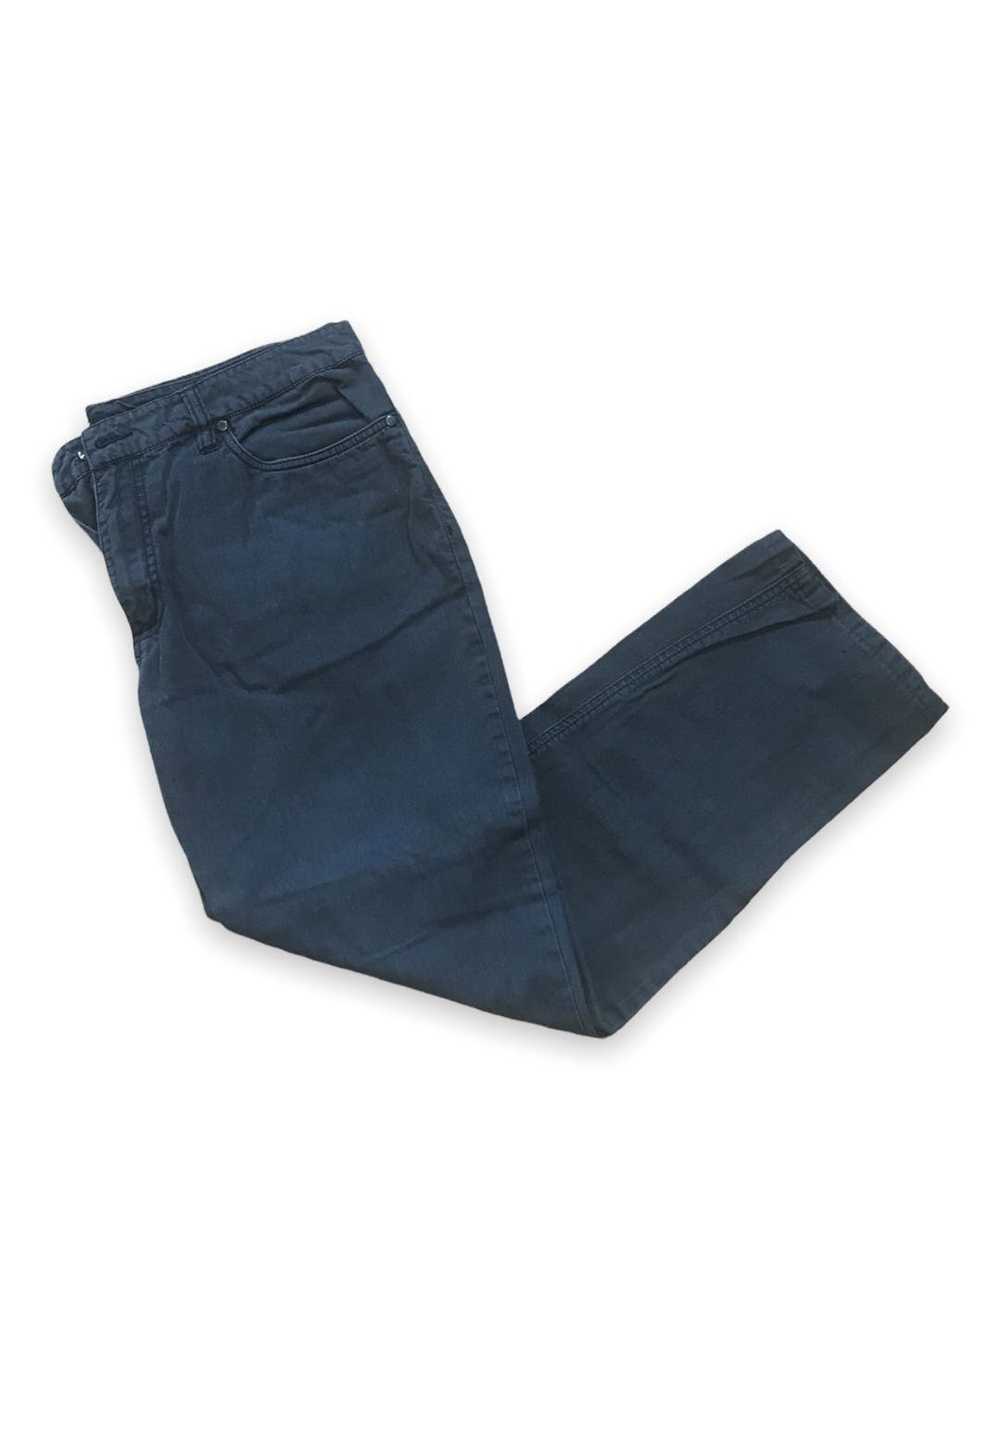 Kenneth Cole Kenneth Cole pants - image 1